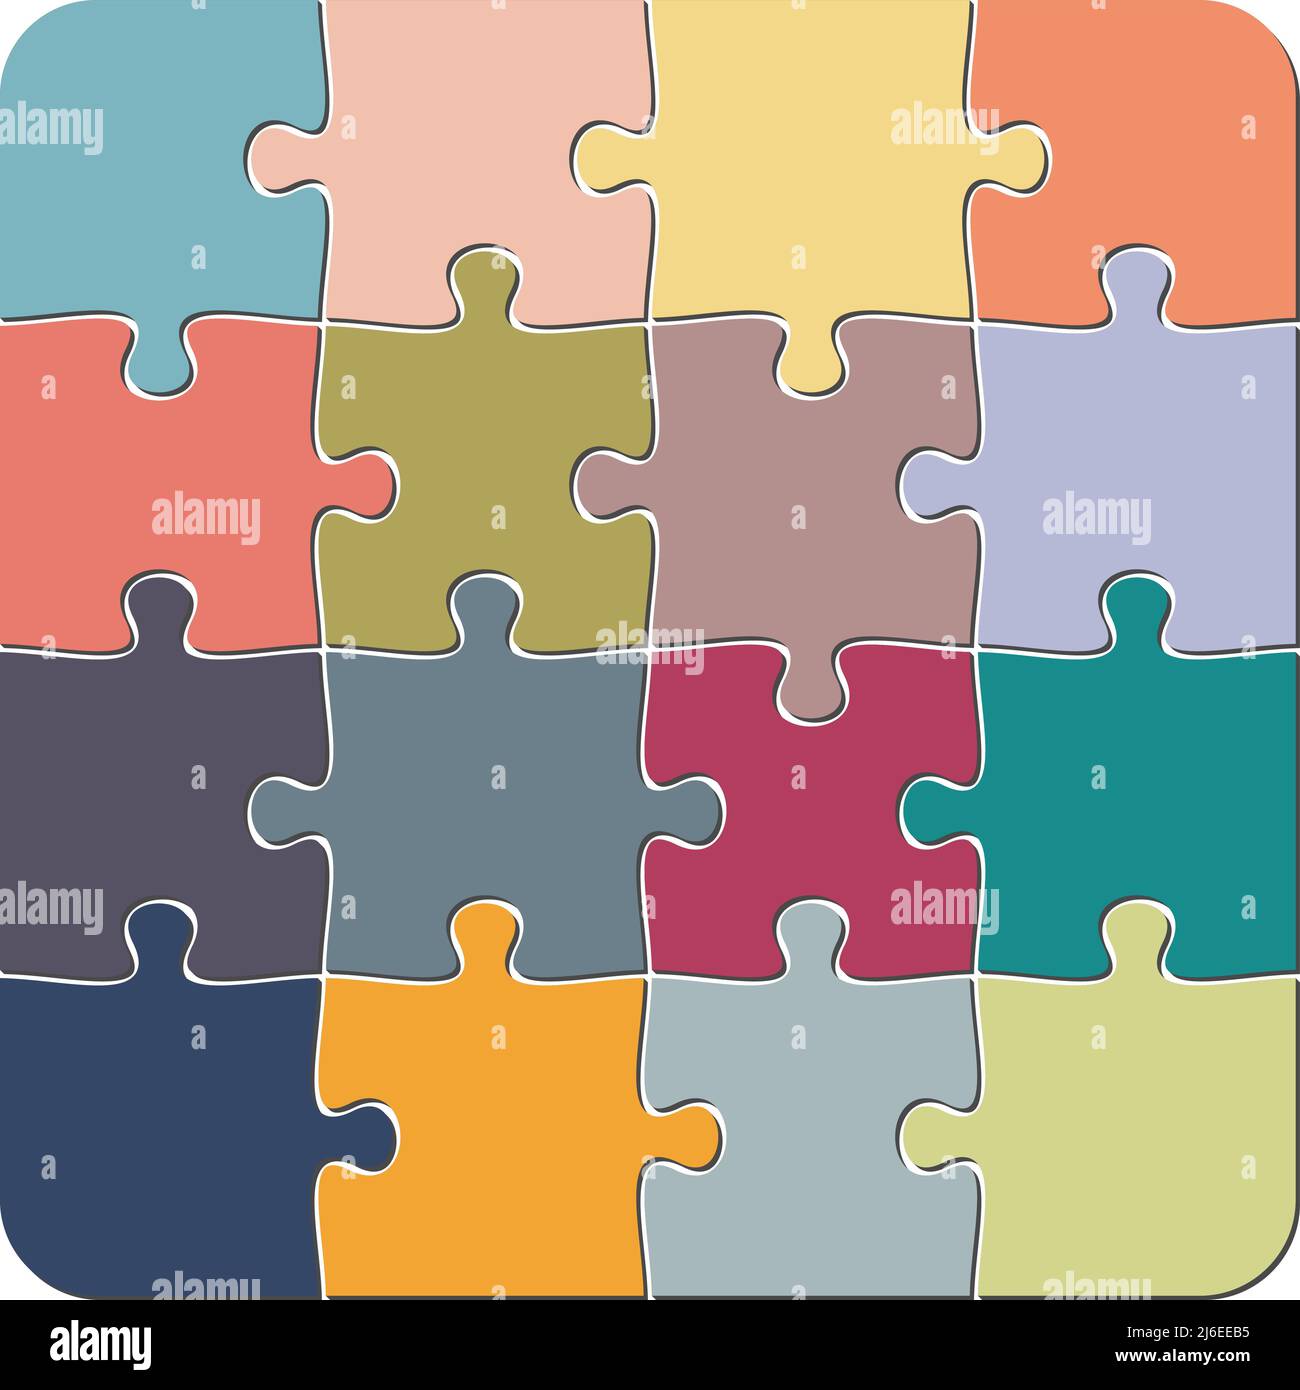 colorful 4 x 4 jigsaw puzzle template, vector illustration isolated on white background Stock Vector